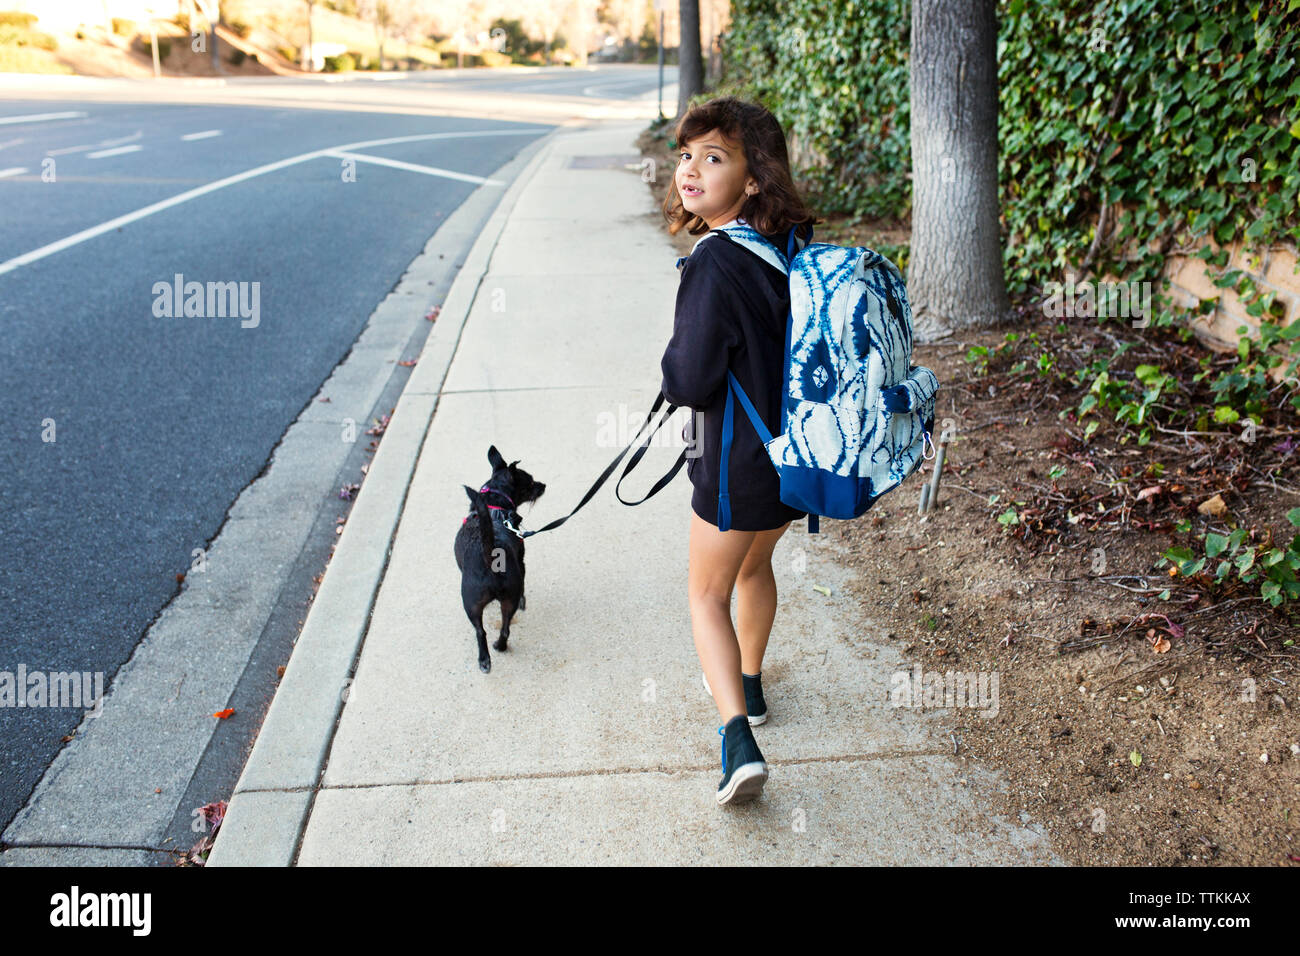 Rear view portrait of girl walking with dog on sidewalk Stock Photo